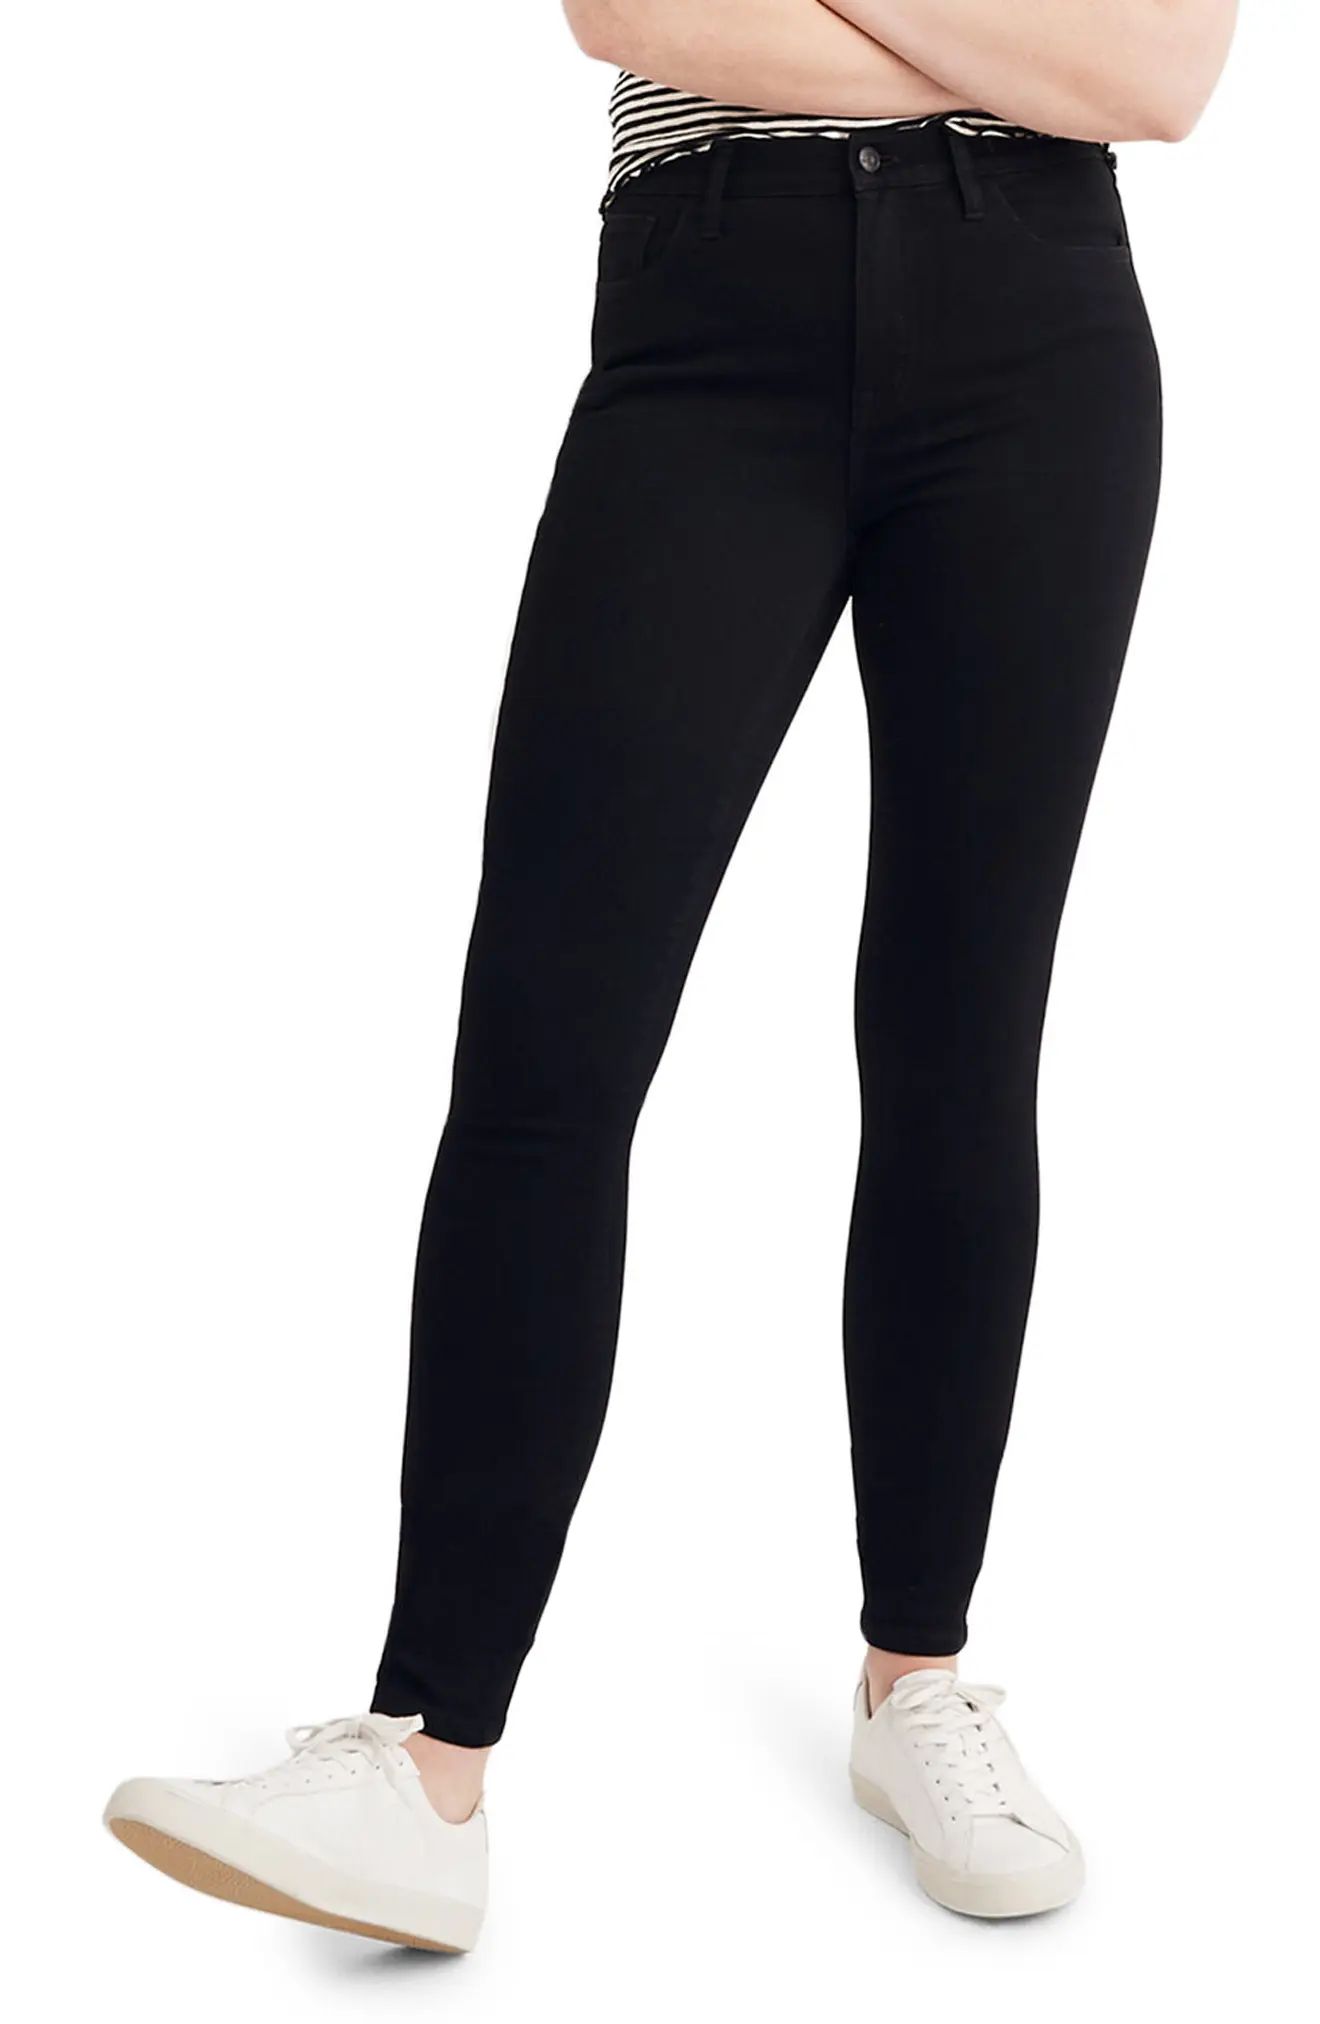 Madewell Roadtripper Jeans in Bennet Black at Nordstrom, Size 29 Tall | Nordstrom